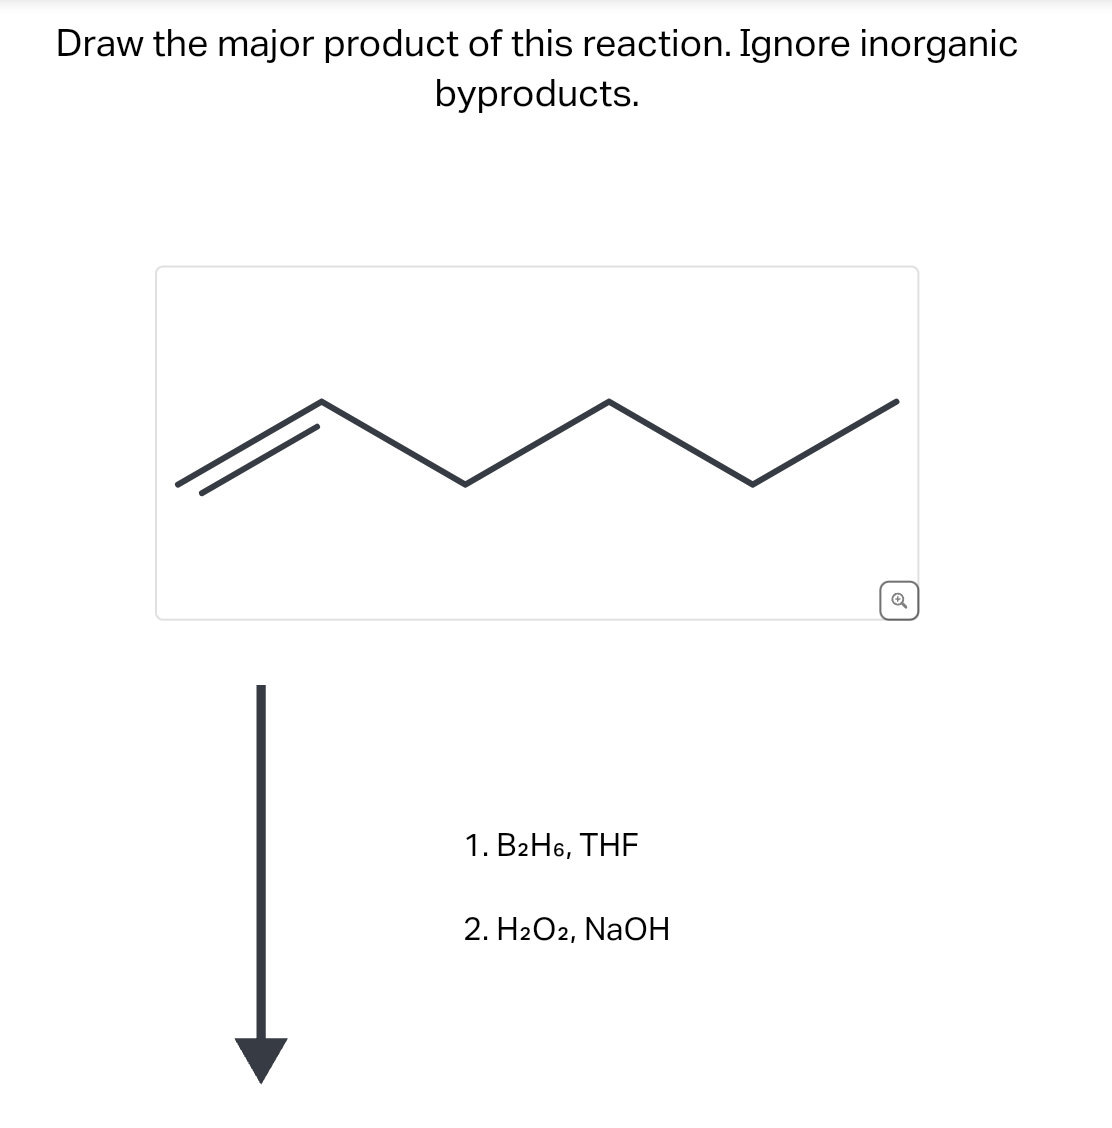 Draw the major product of this reaction. Ignore inorganic
byproducts.
1. B2H6, THE
2. H2O2, NaOH
Q